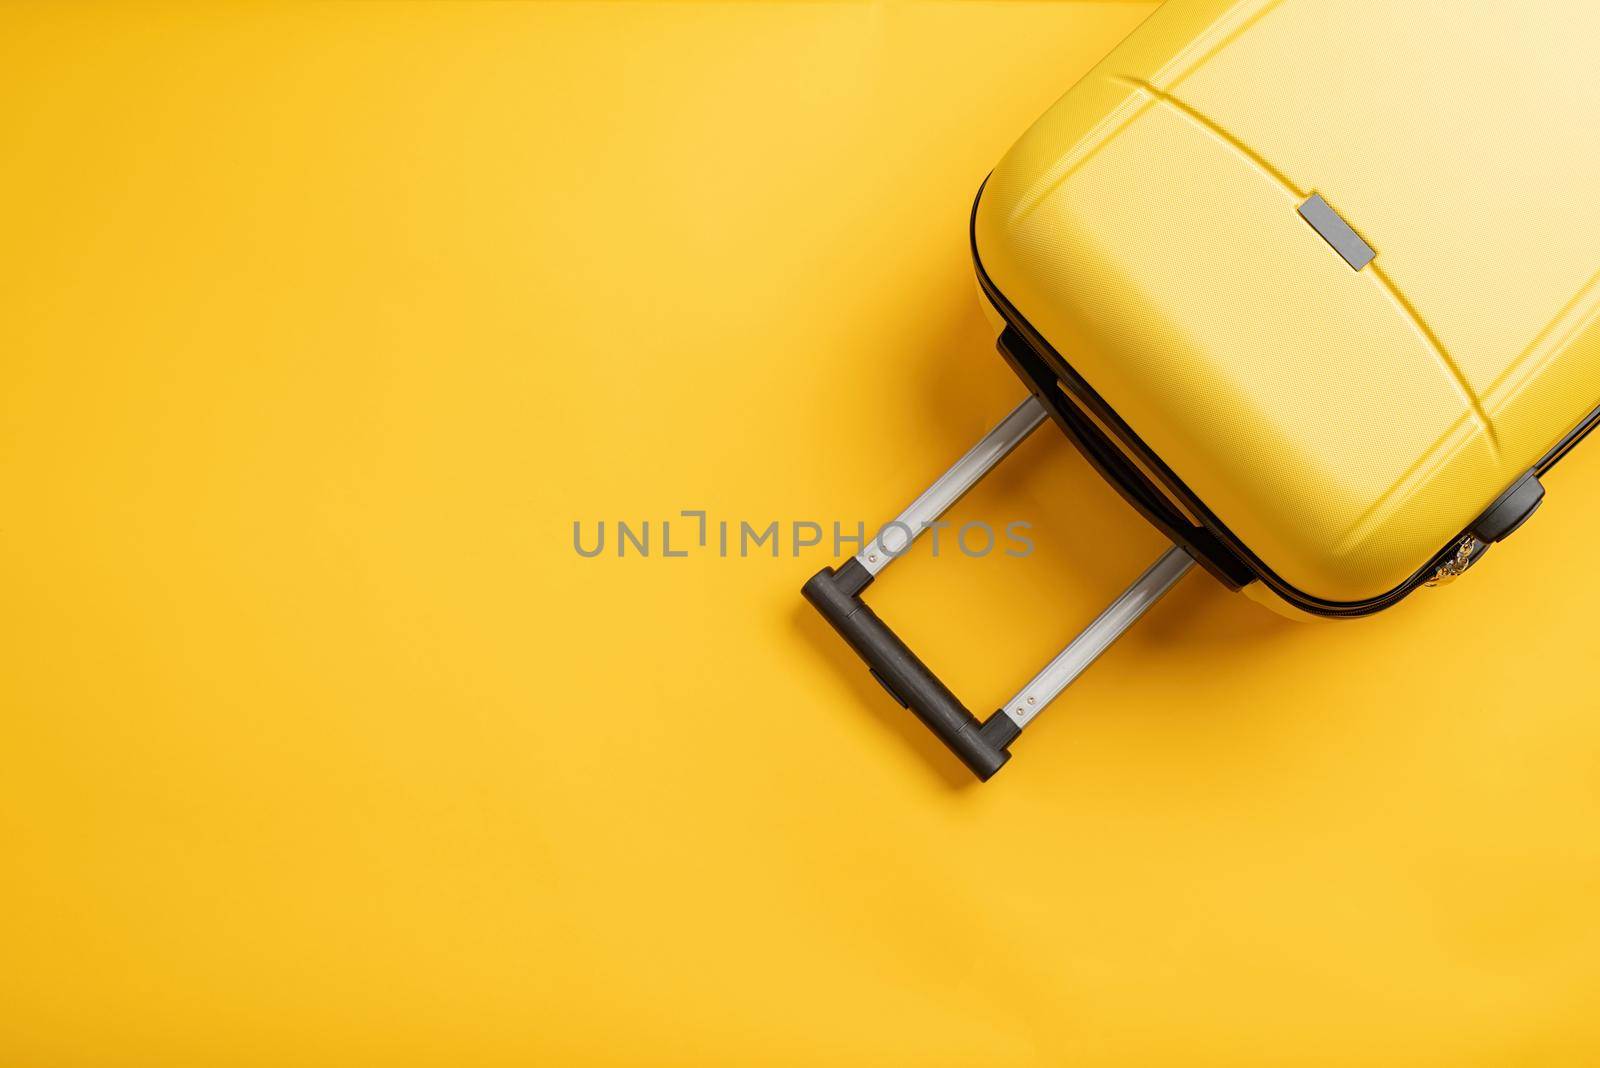 travel plan, trip and vacation, minimal. Top view yellow travel bag or suitcase on solid yellow background with copy space